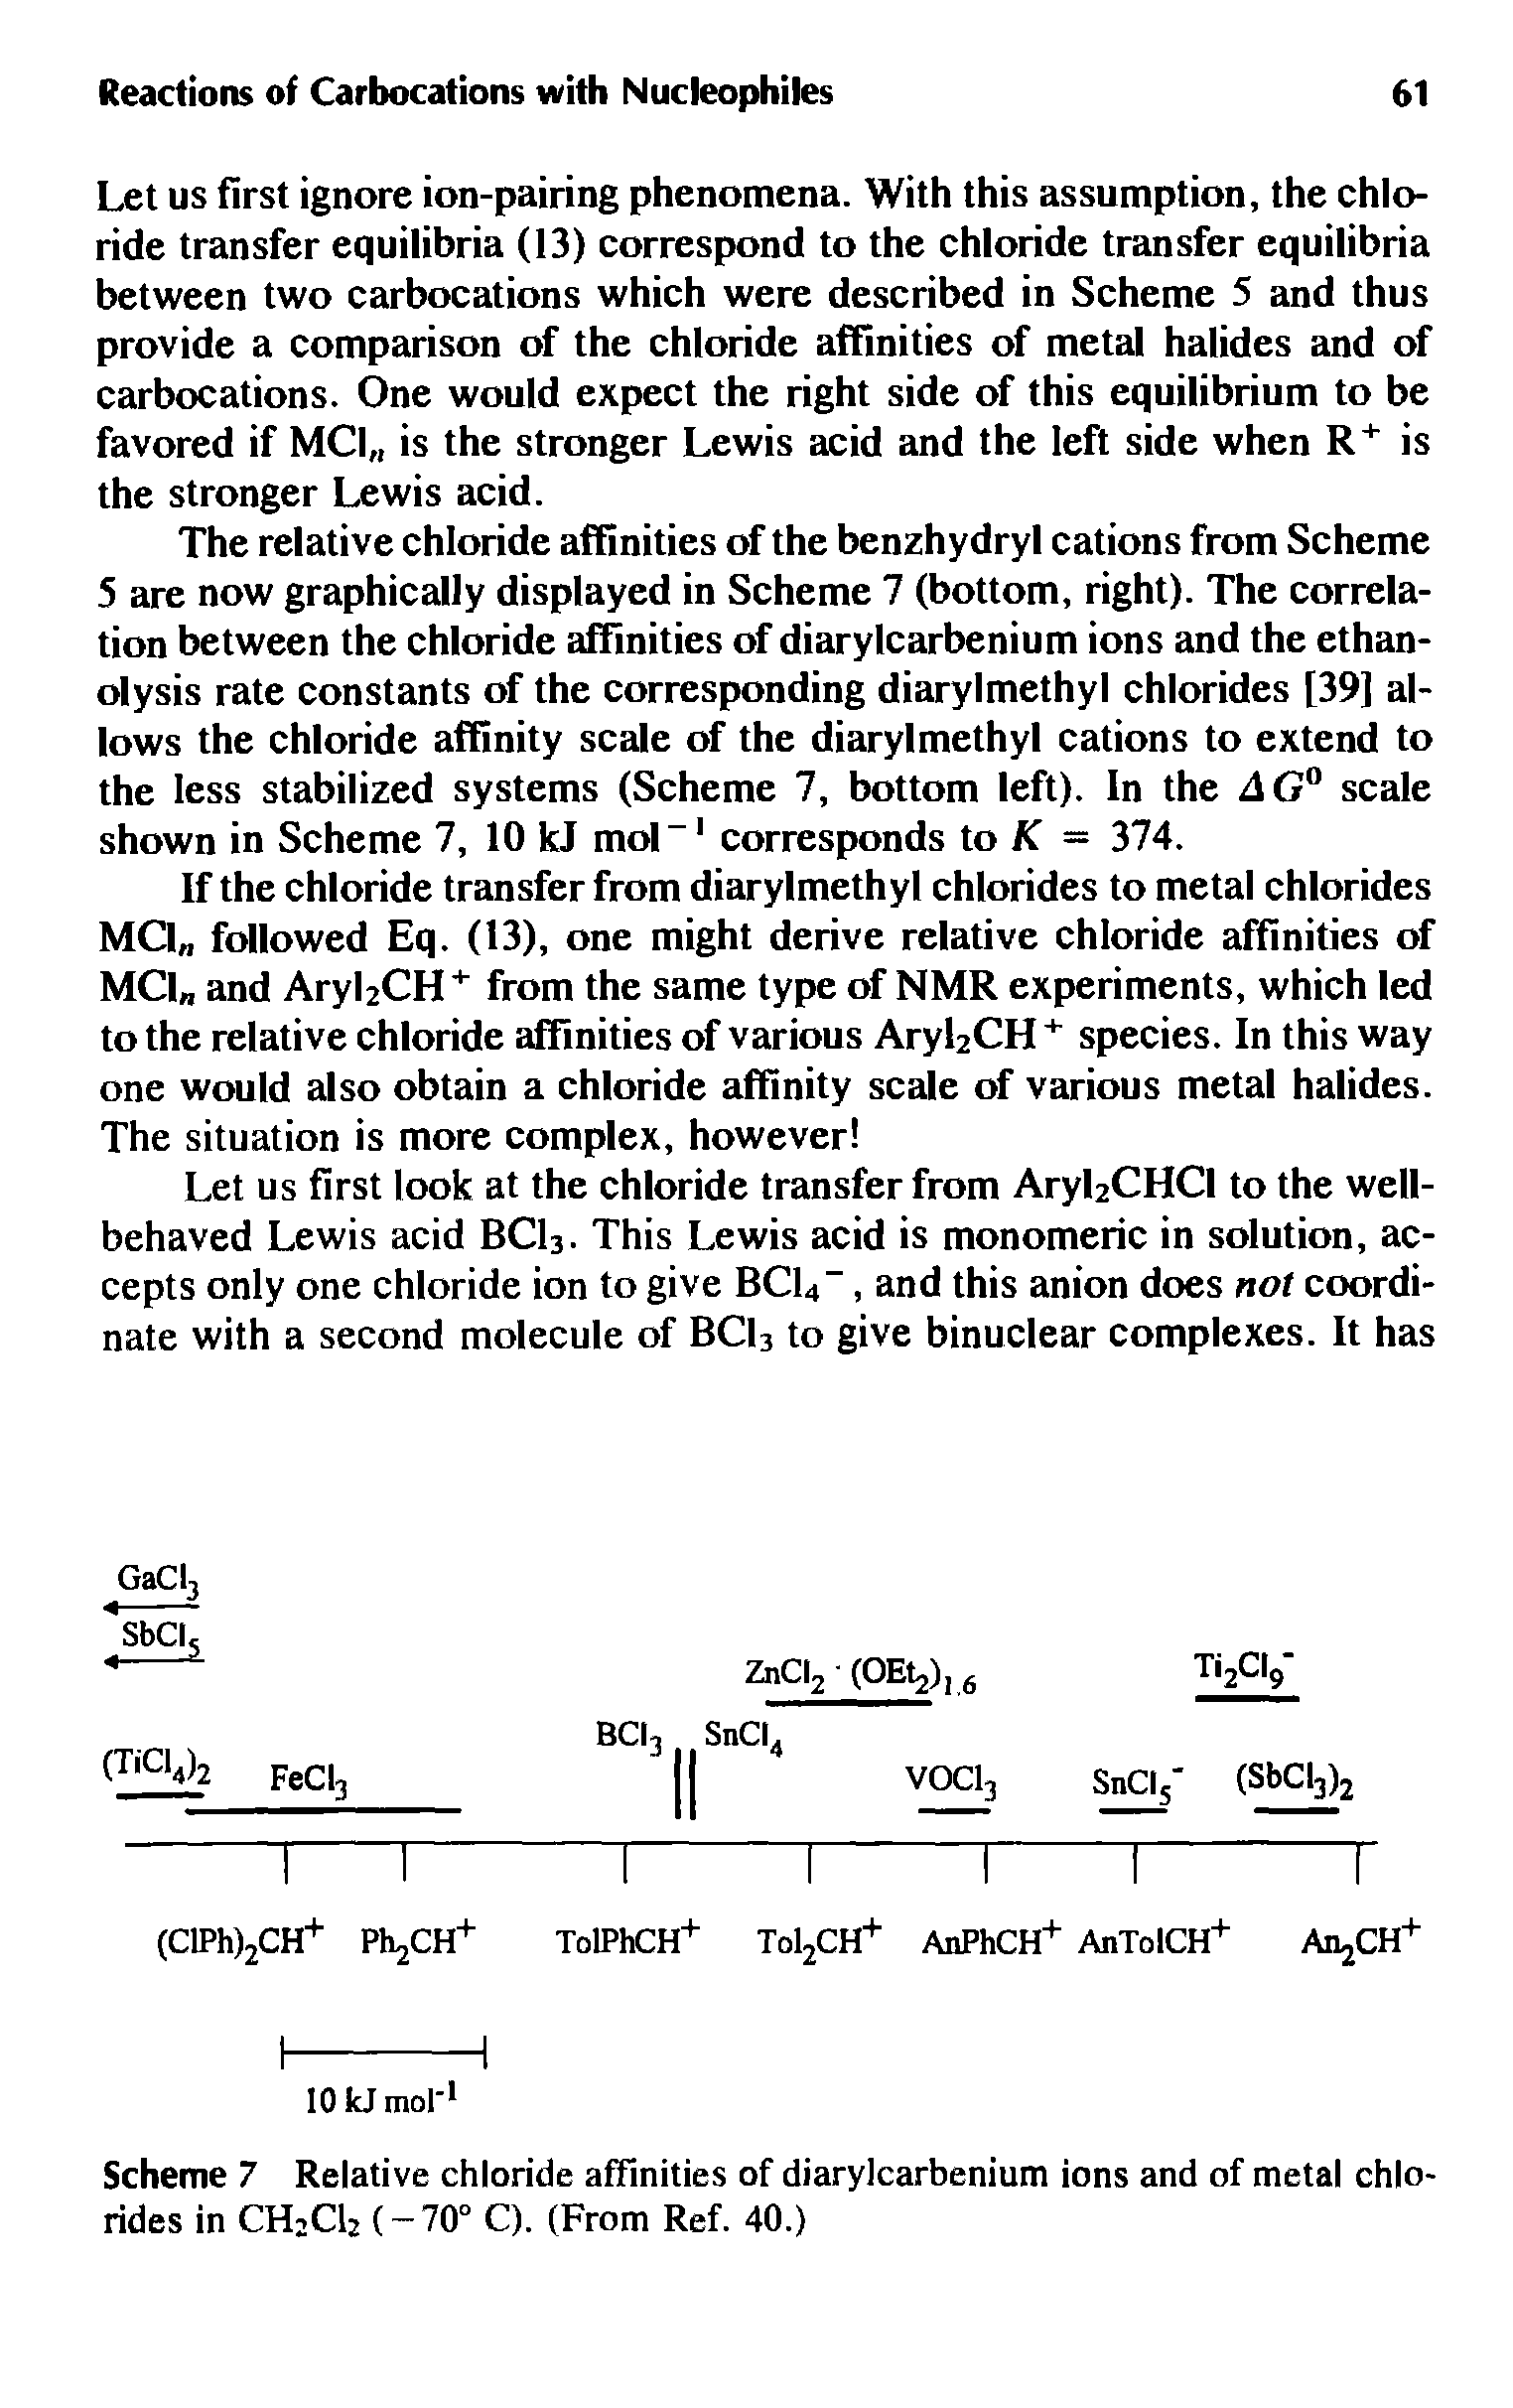 Scheme 7 Relative chloride affinities of diarylcarbenium ions and of metal chlorides in CH2C12 (-70° C). (From Ref. 40.)...